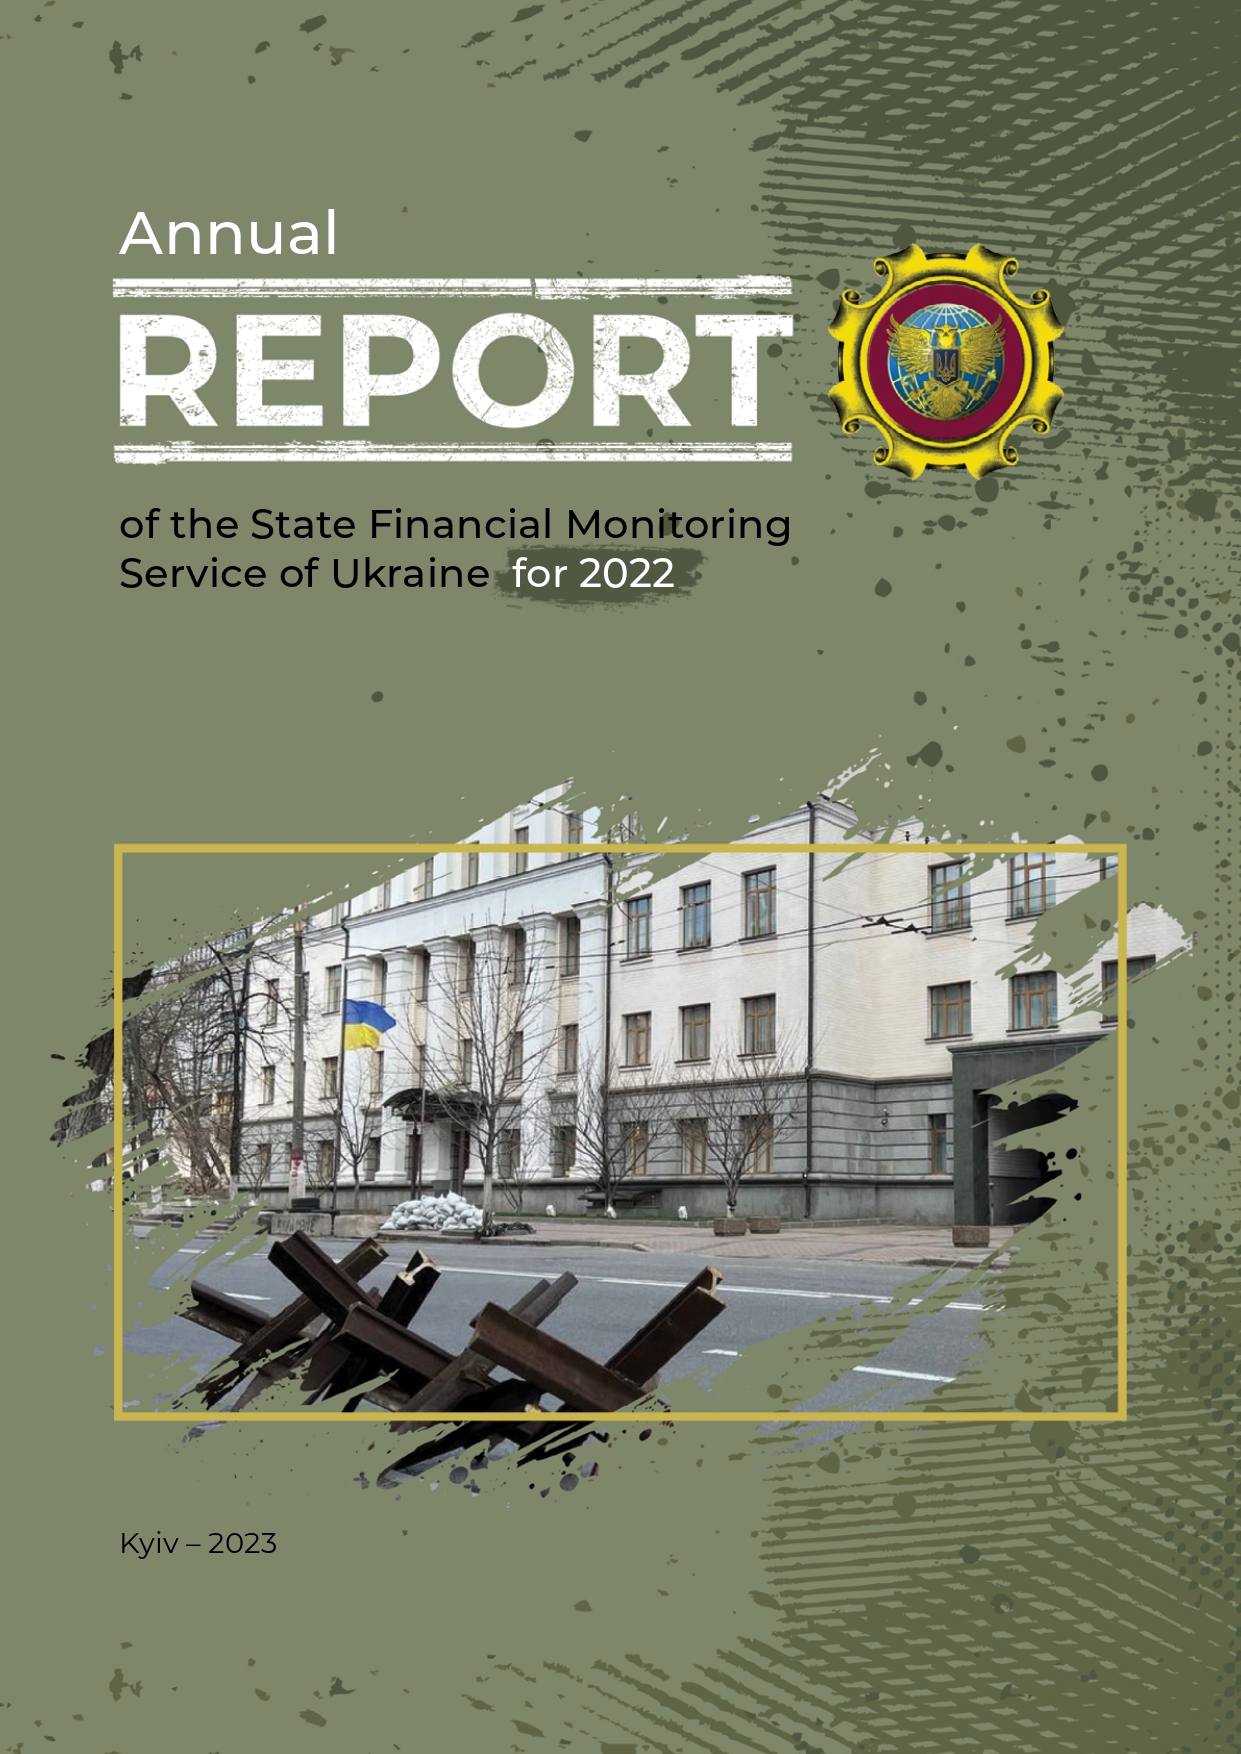 Report of the State Financial Monitoring Service of Ukraine 2022